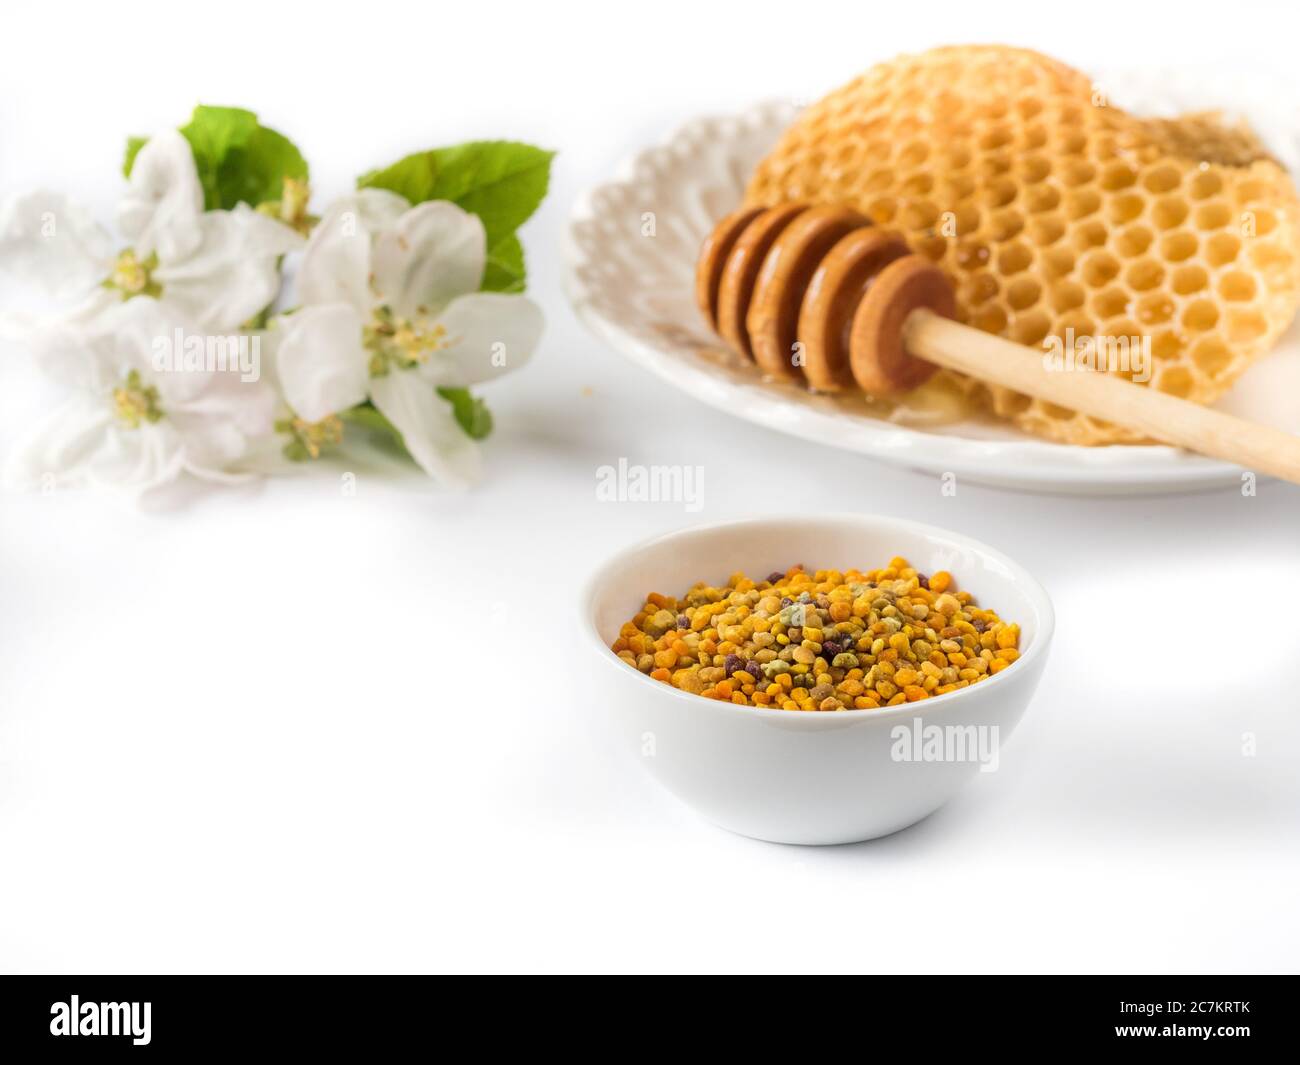 Bee pollen grains in white ceramic bowl and honeycombs on white background.  Stock Photo